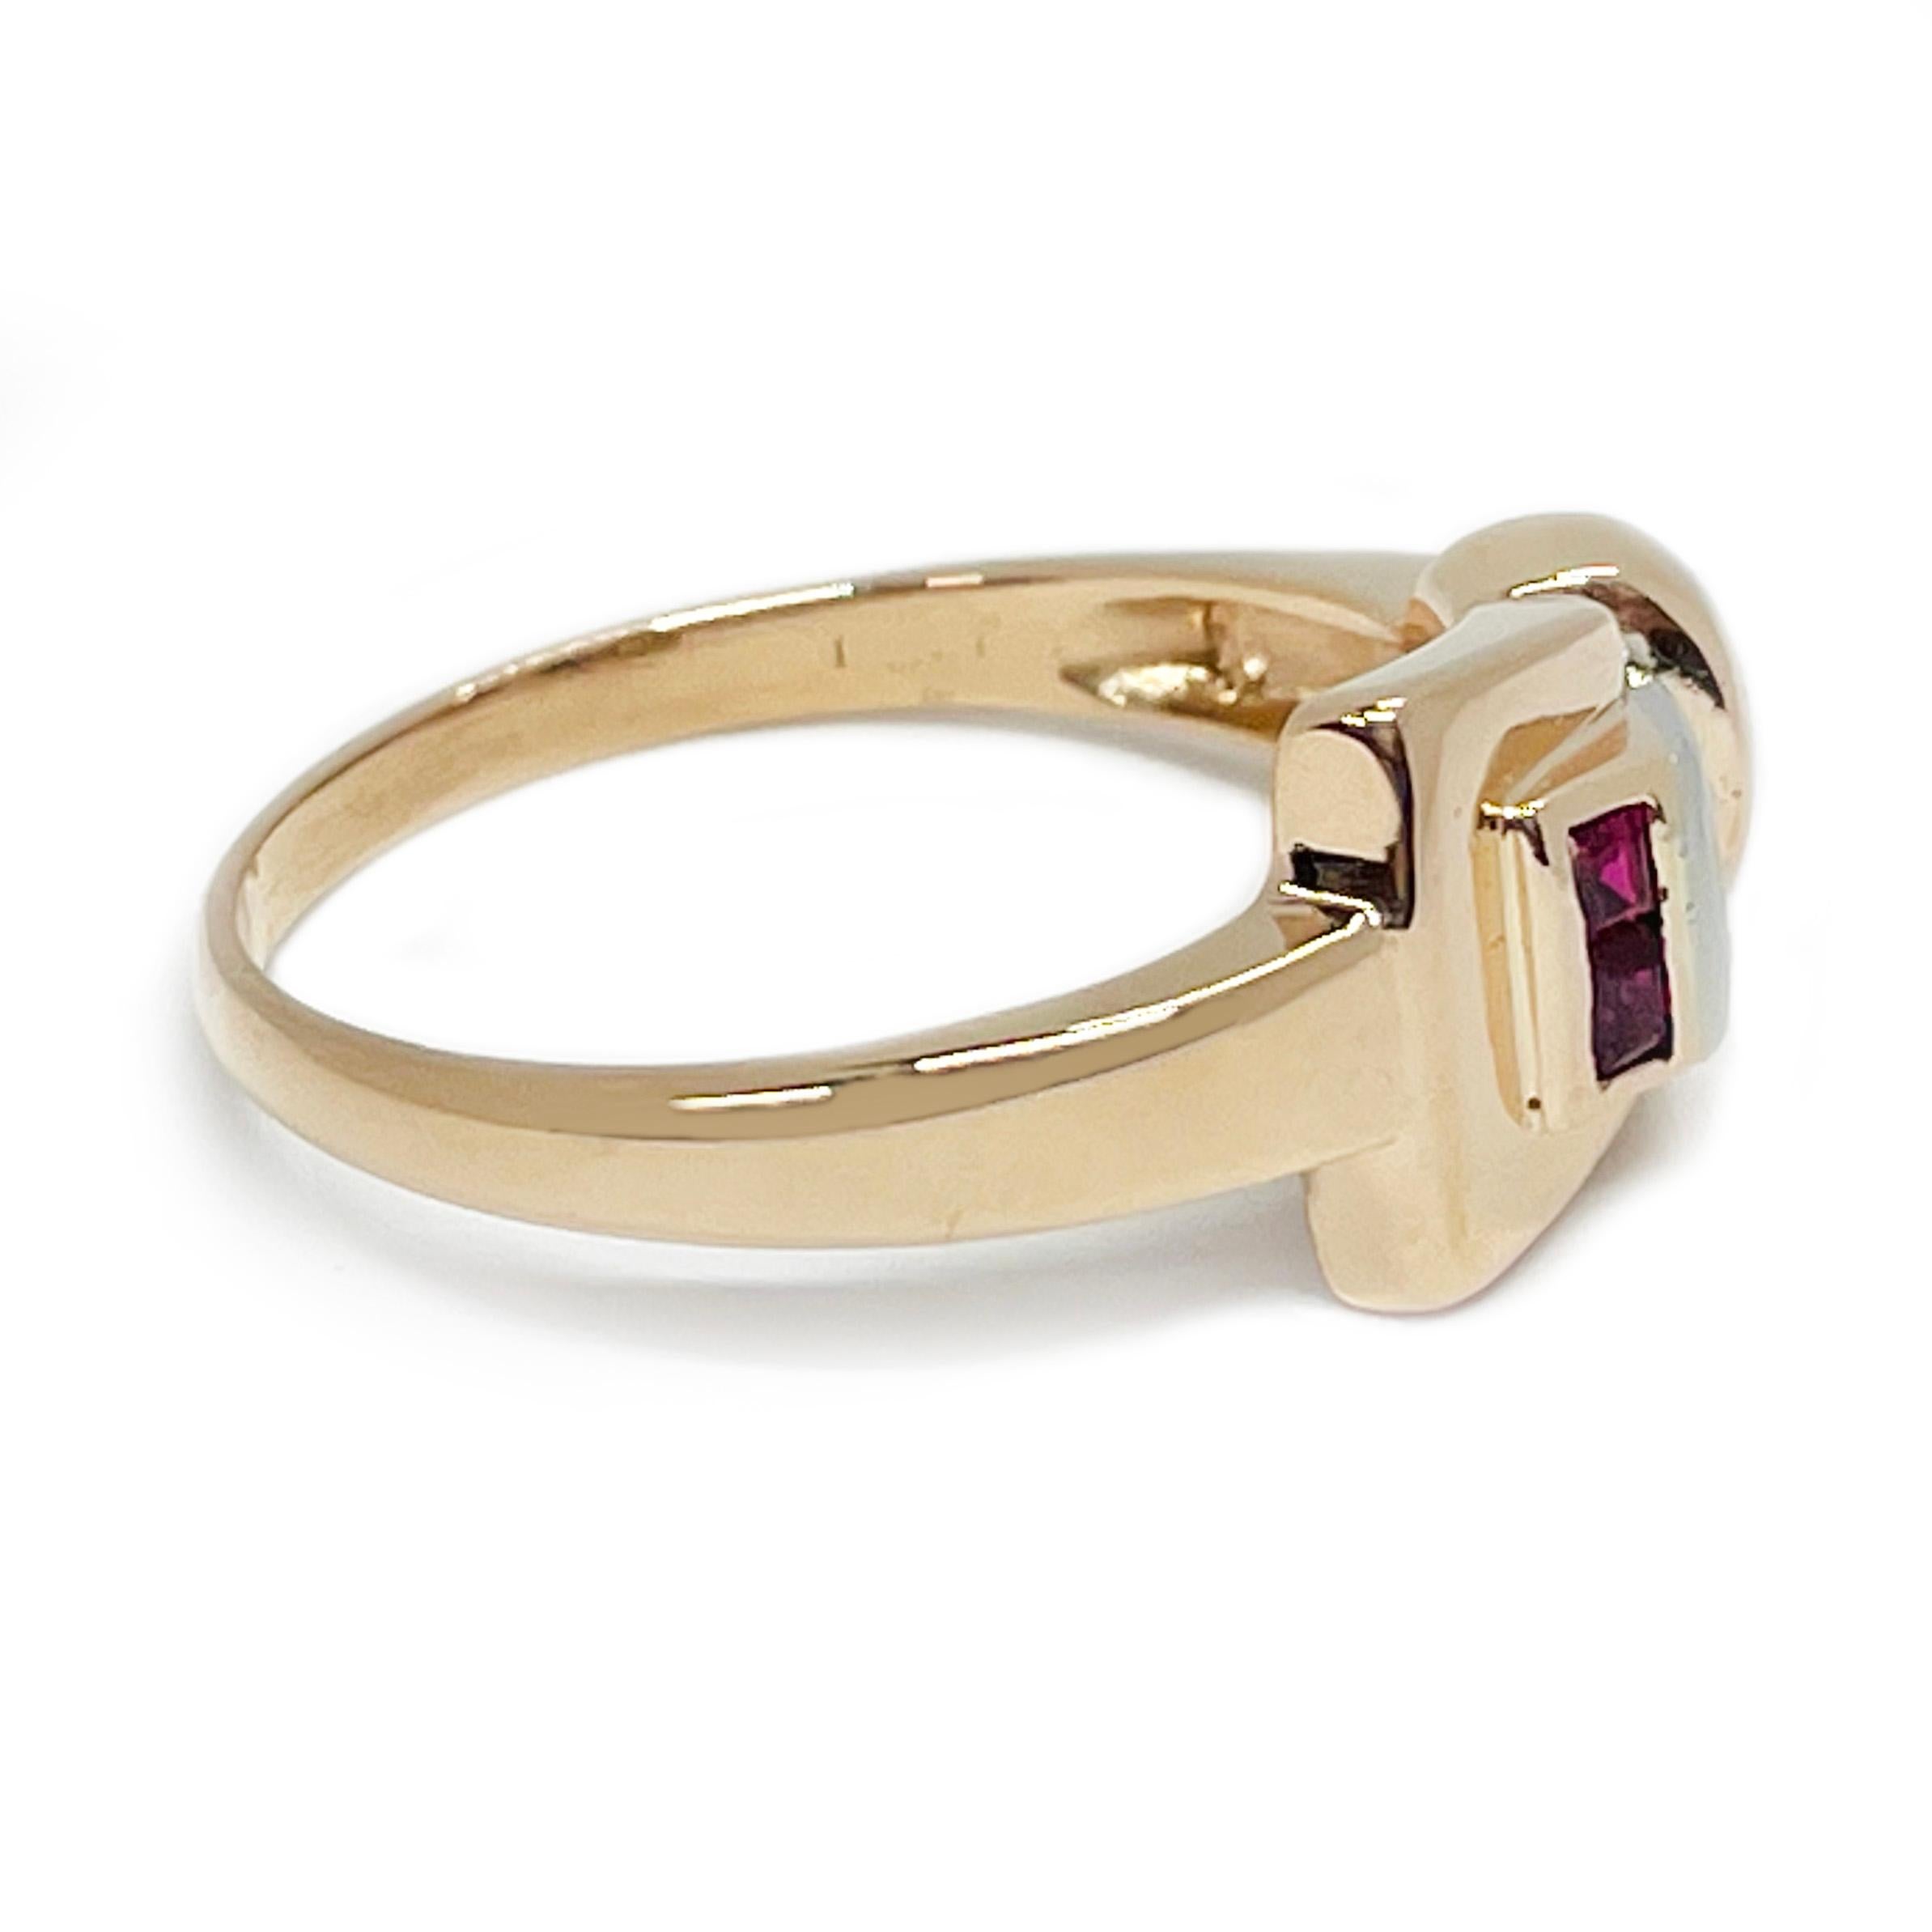 Platinum 14 Karat Rose Gold Diamond Ruby Buckle Ring. The ring features a belt buckle design with a bead set center diamond and two accent square-cut rubies bezel-set along the inside of the buckle. The round center diamond has a total carat weight